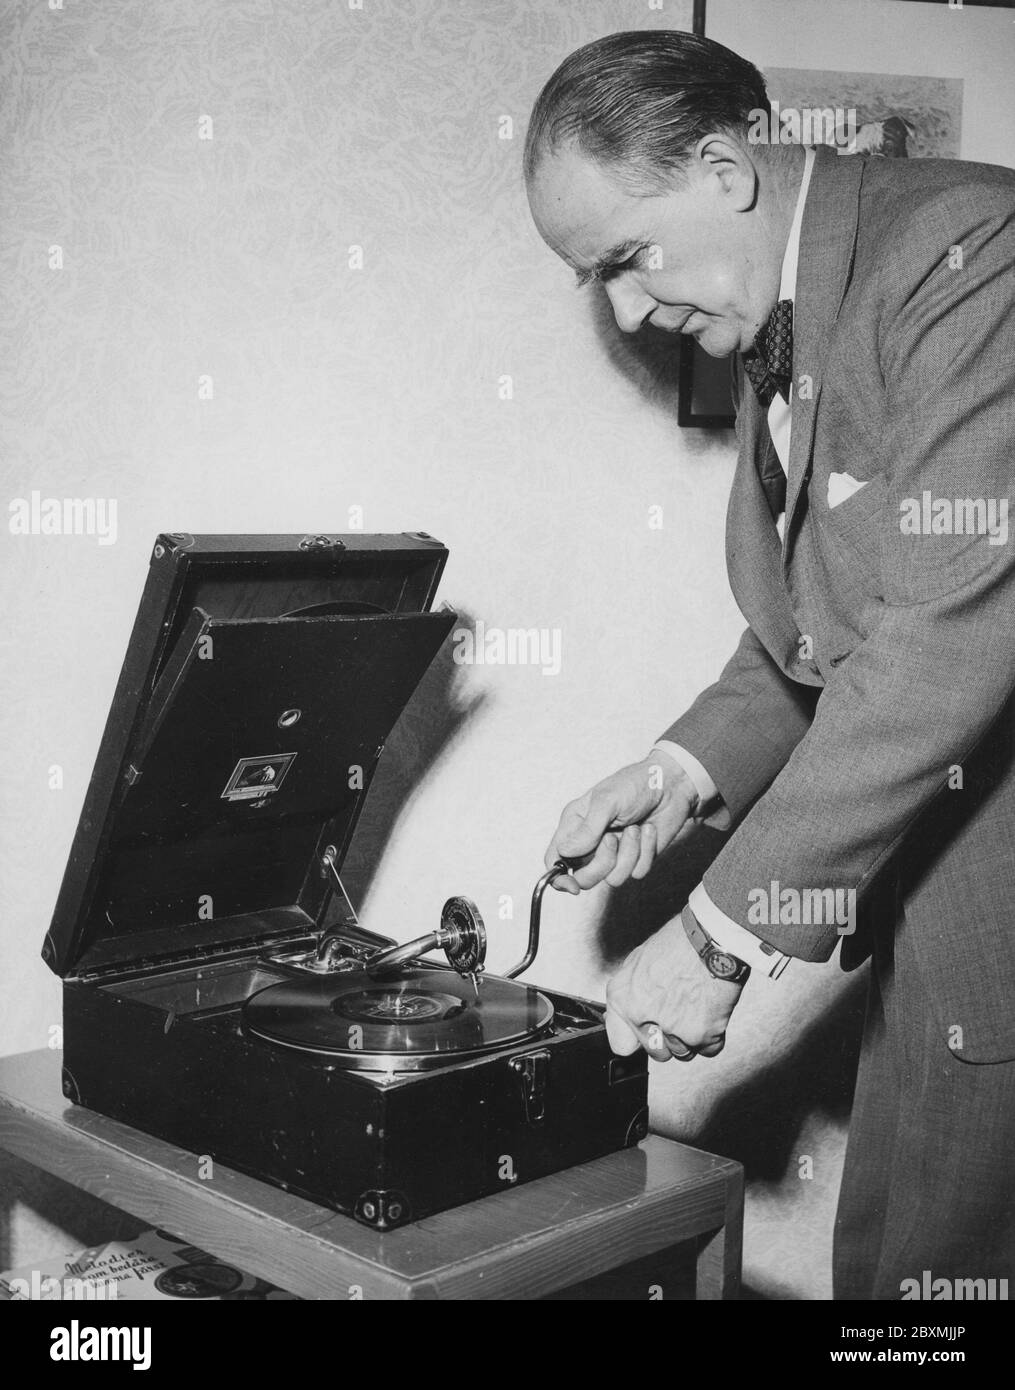 Hugo Lindh. 1899-1979. Swedish composer at home operating his portable gramophone player. It's operated by winding it up with a lever. The record then plays. When your hear that the recording begins to slow down, you know you have to wind i up again. The records were made of fragile material and the speed of the record to sound as it should was 78 revolutions per minute. Sweden 1940s. Stock Photo